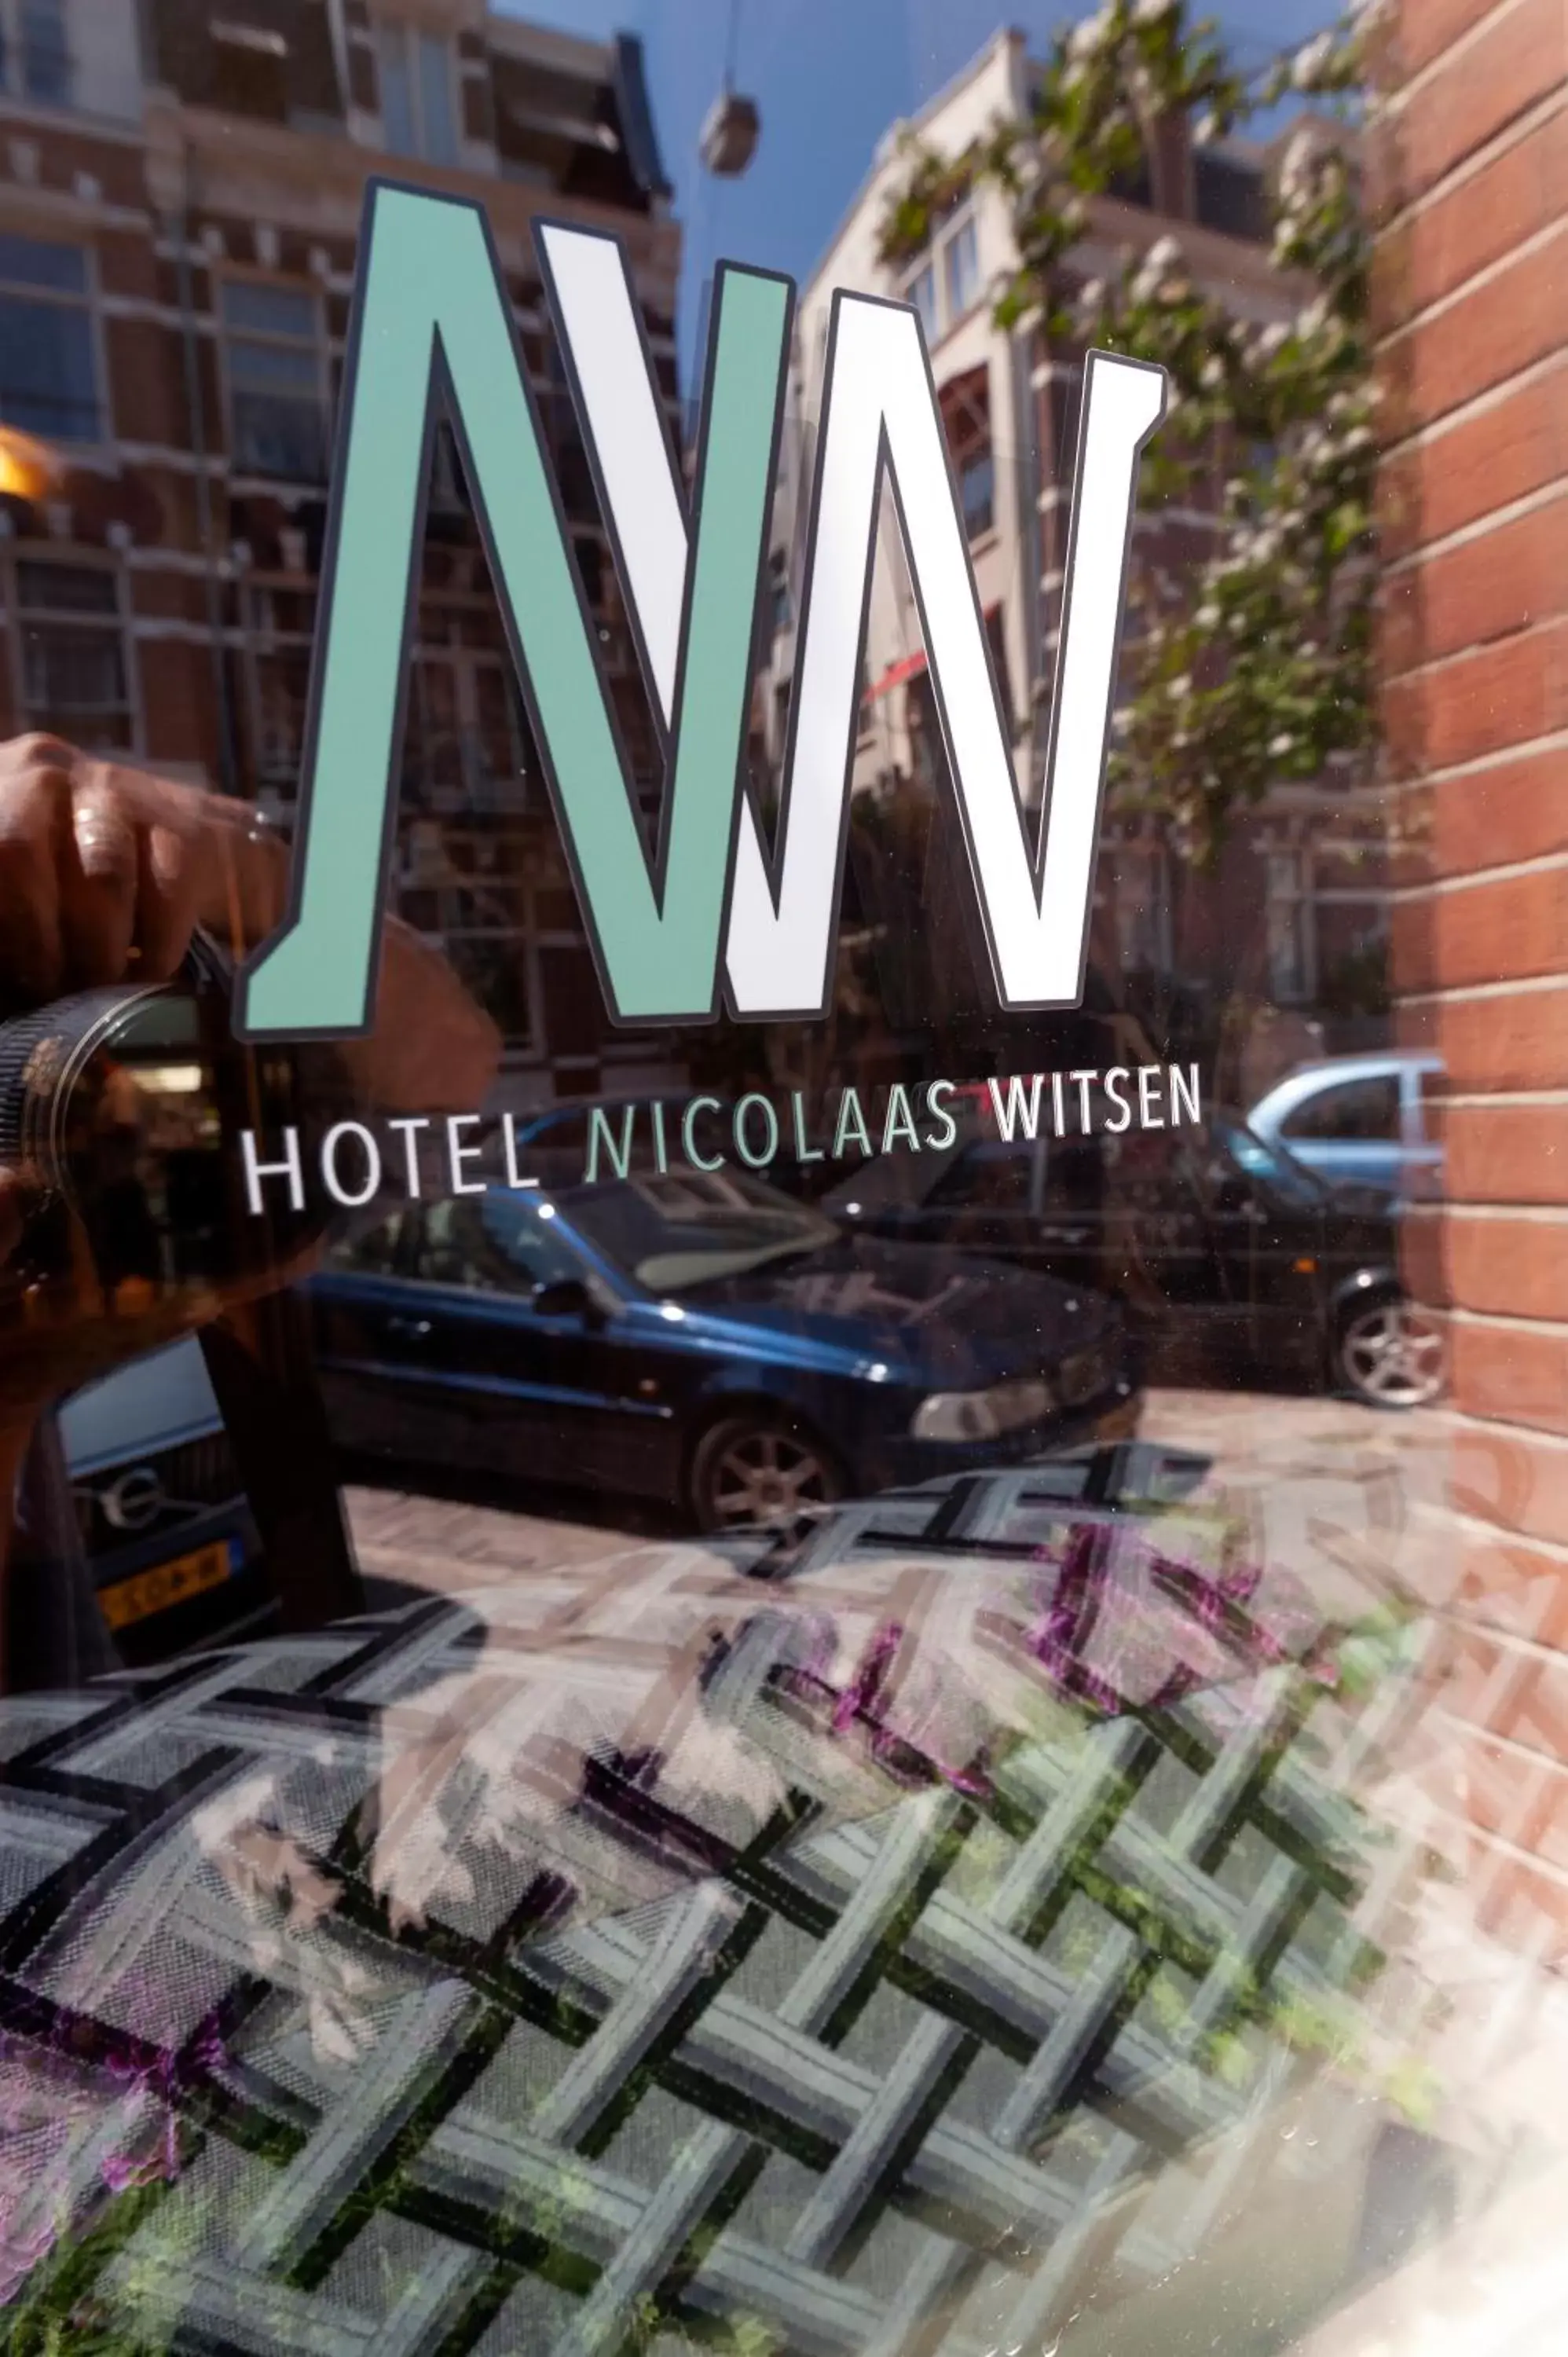 Property logo or sign in Hotel Nicolaas Witsen